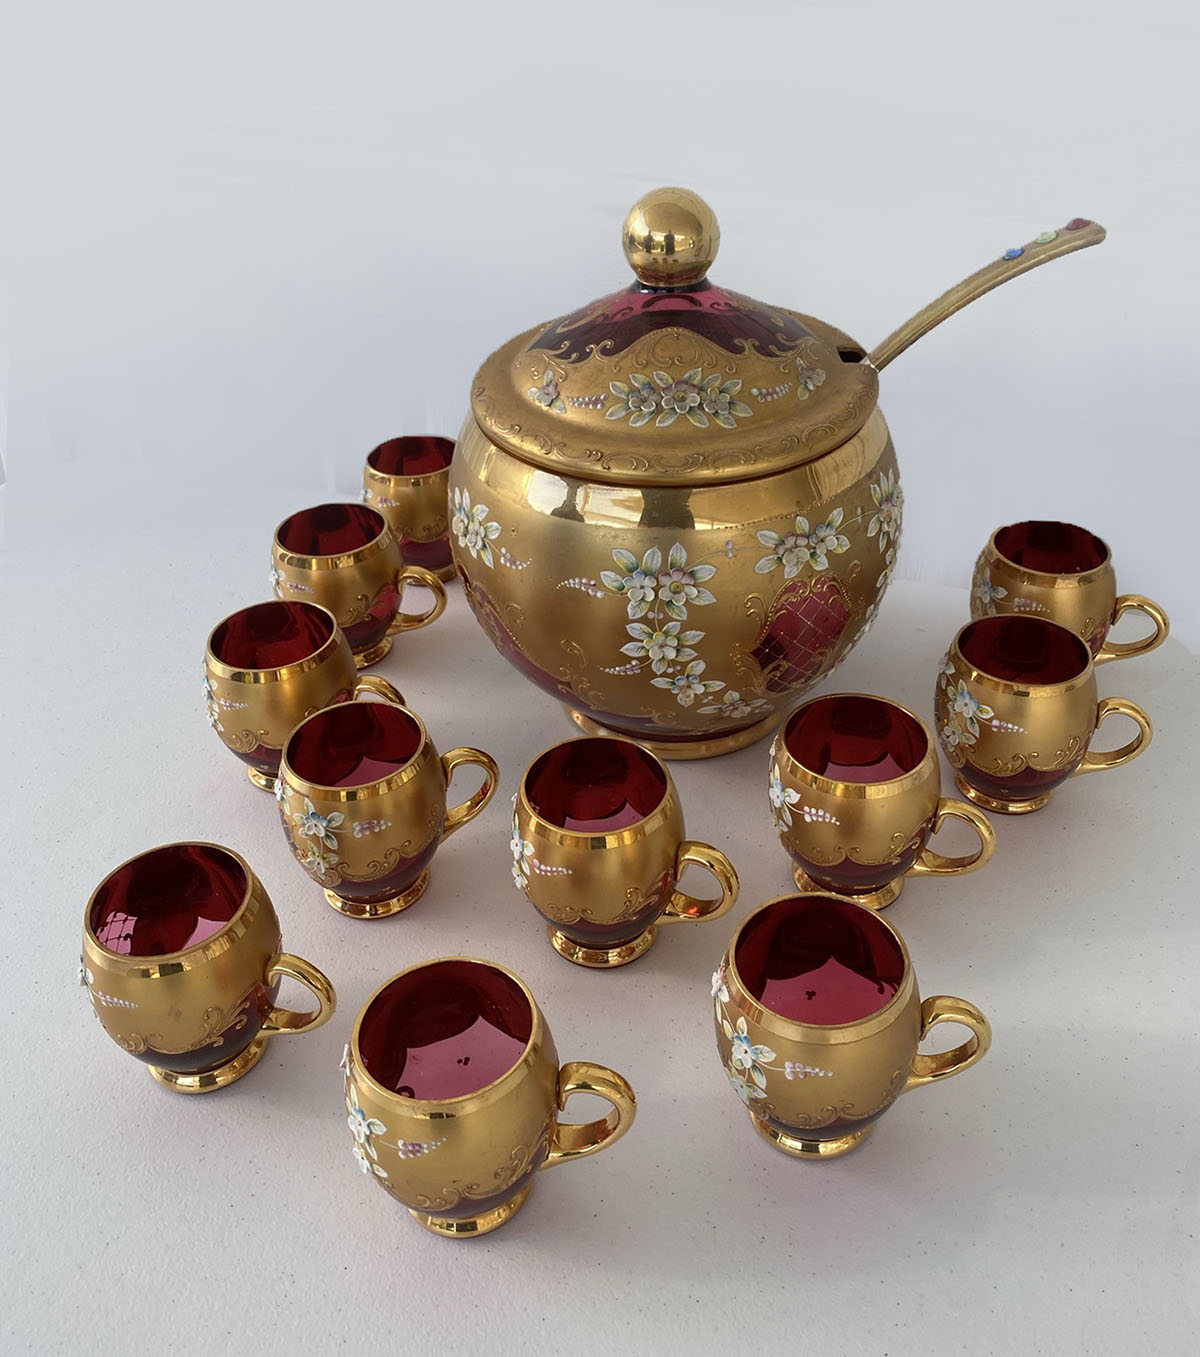 13 PIECE GOLD DECORATED ITALIAN PUNCH